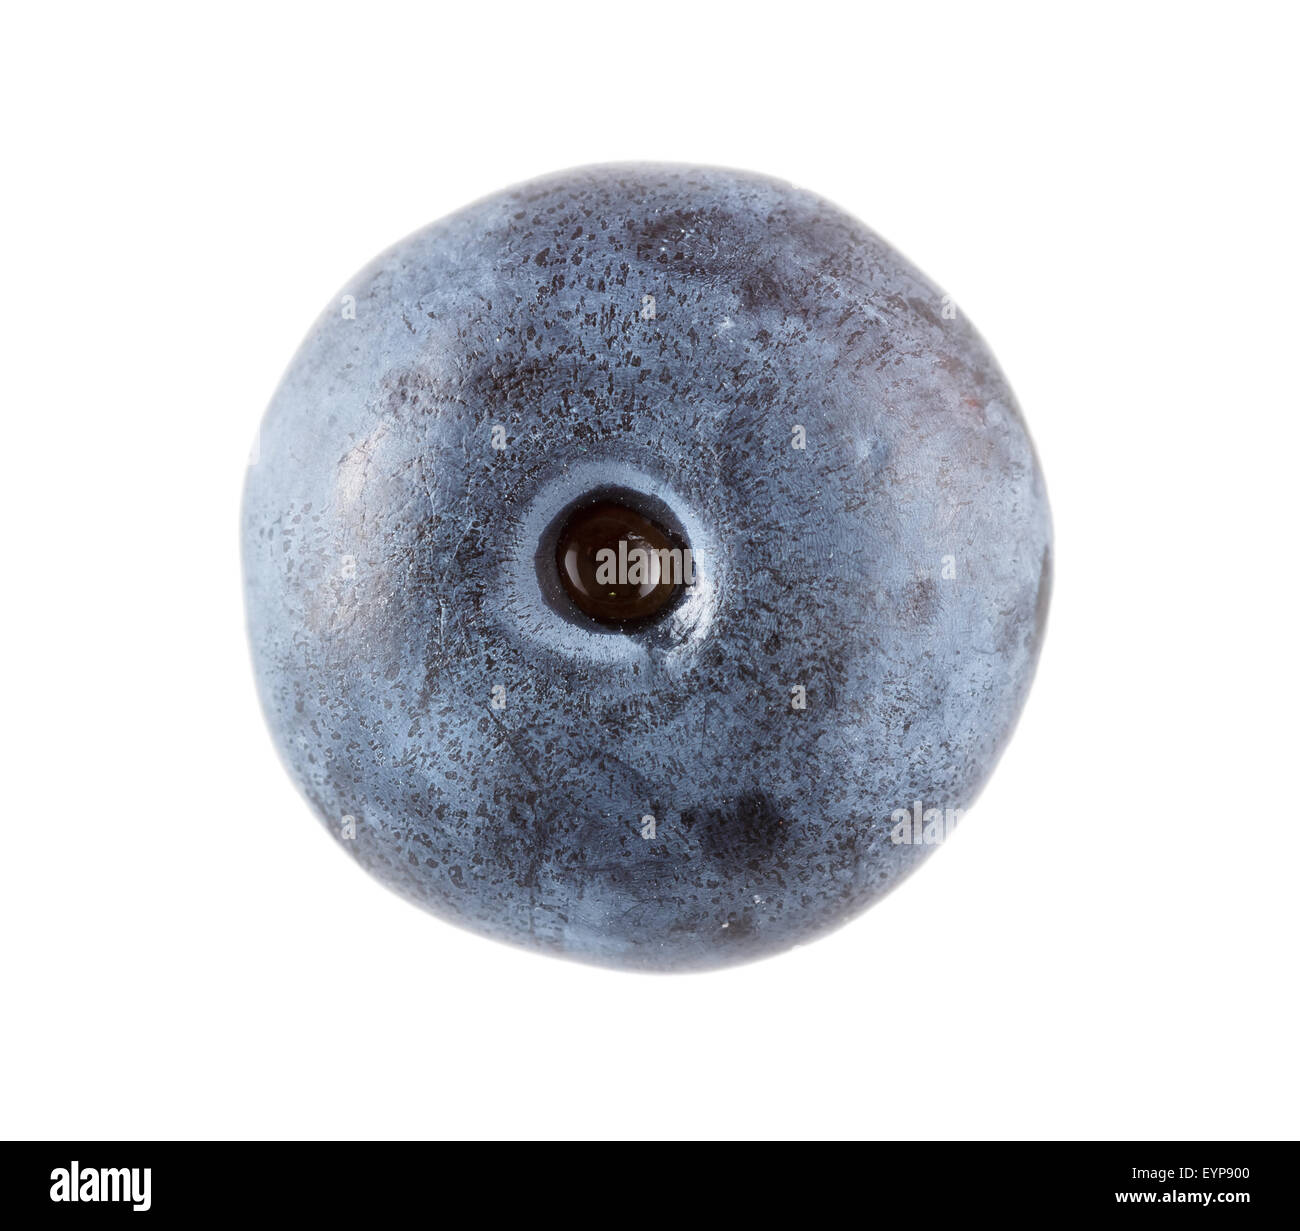 Top view of a single blueberry against a white background Stock Photo